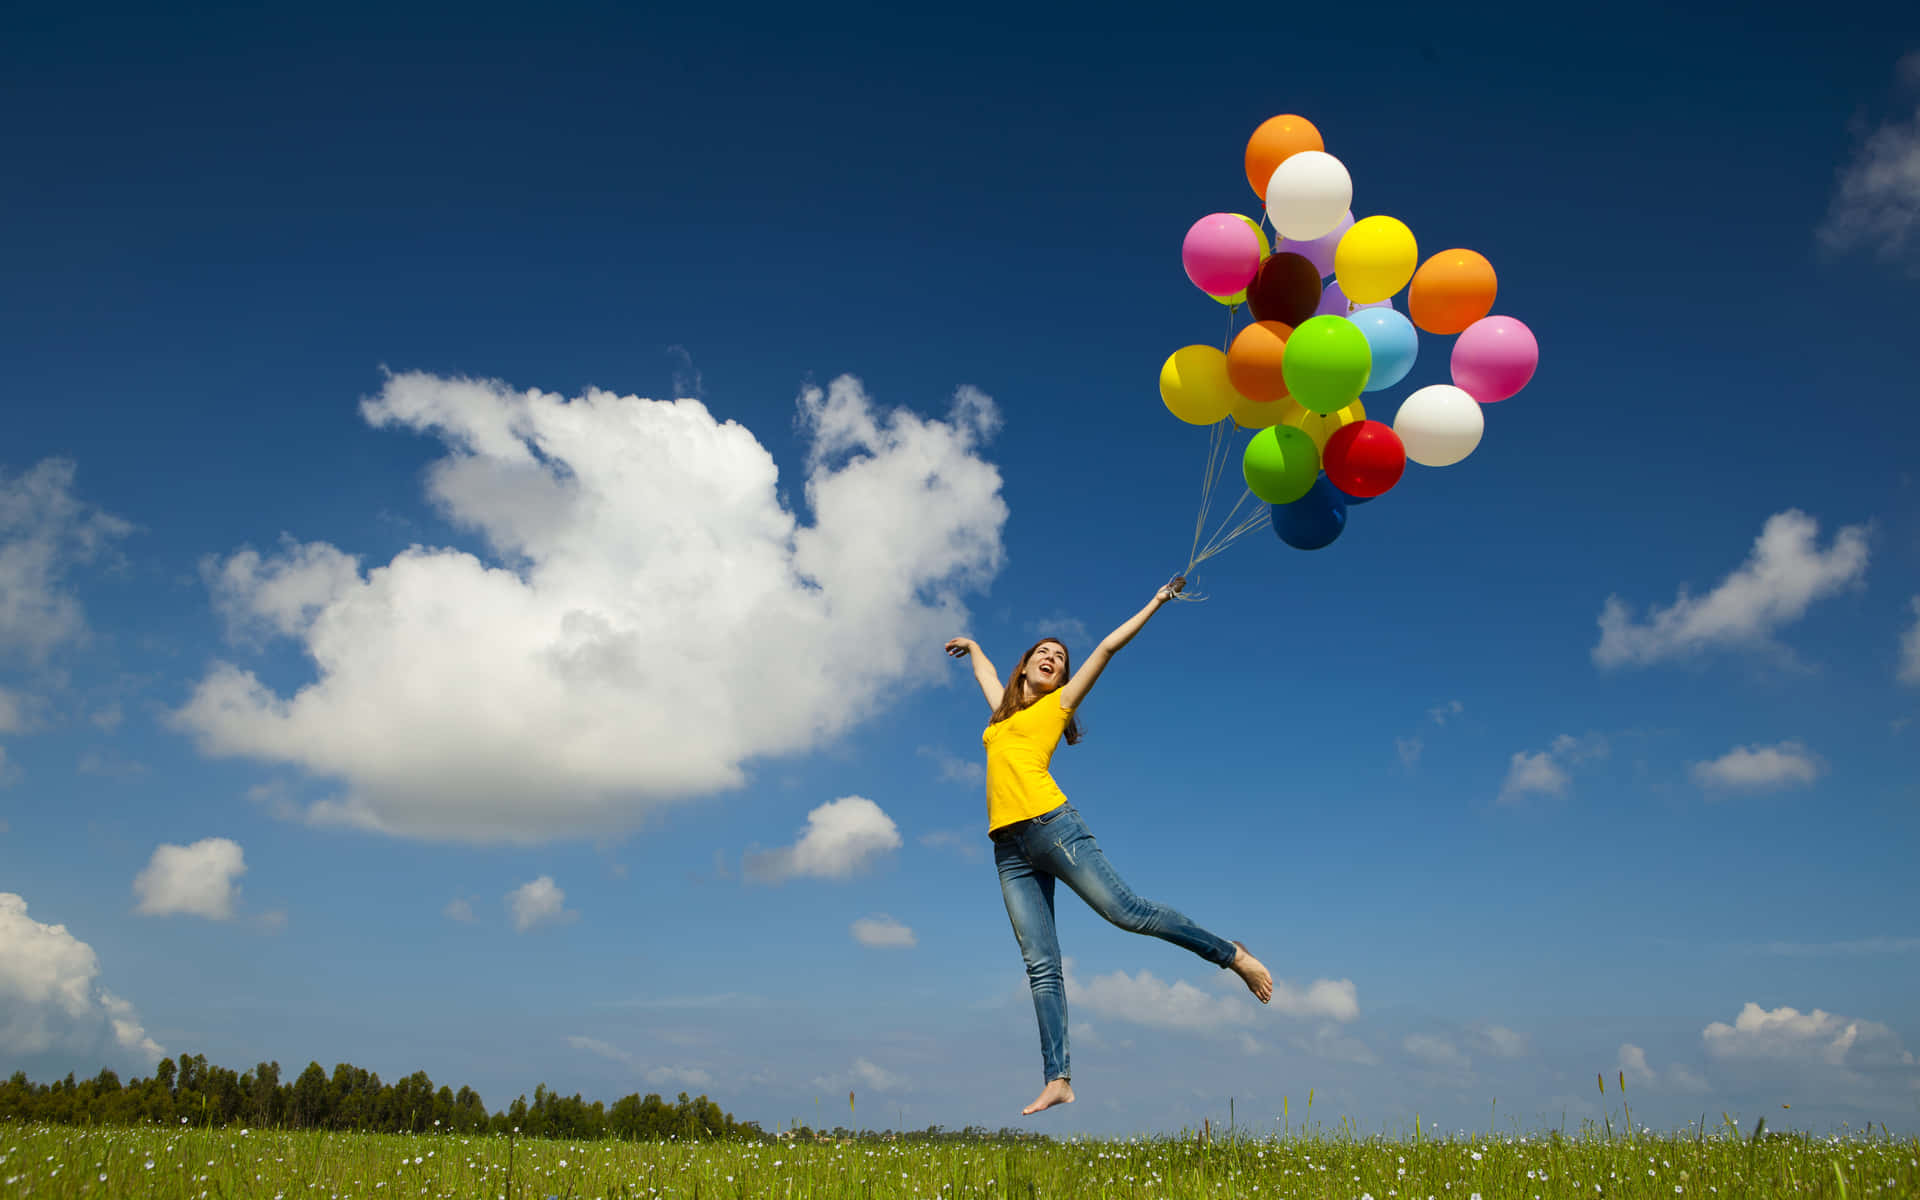 Balloons Background Jumping Lady With Stringed Balloons